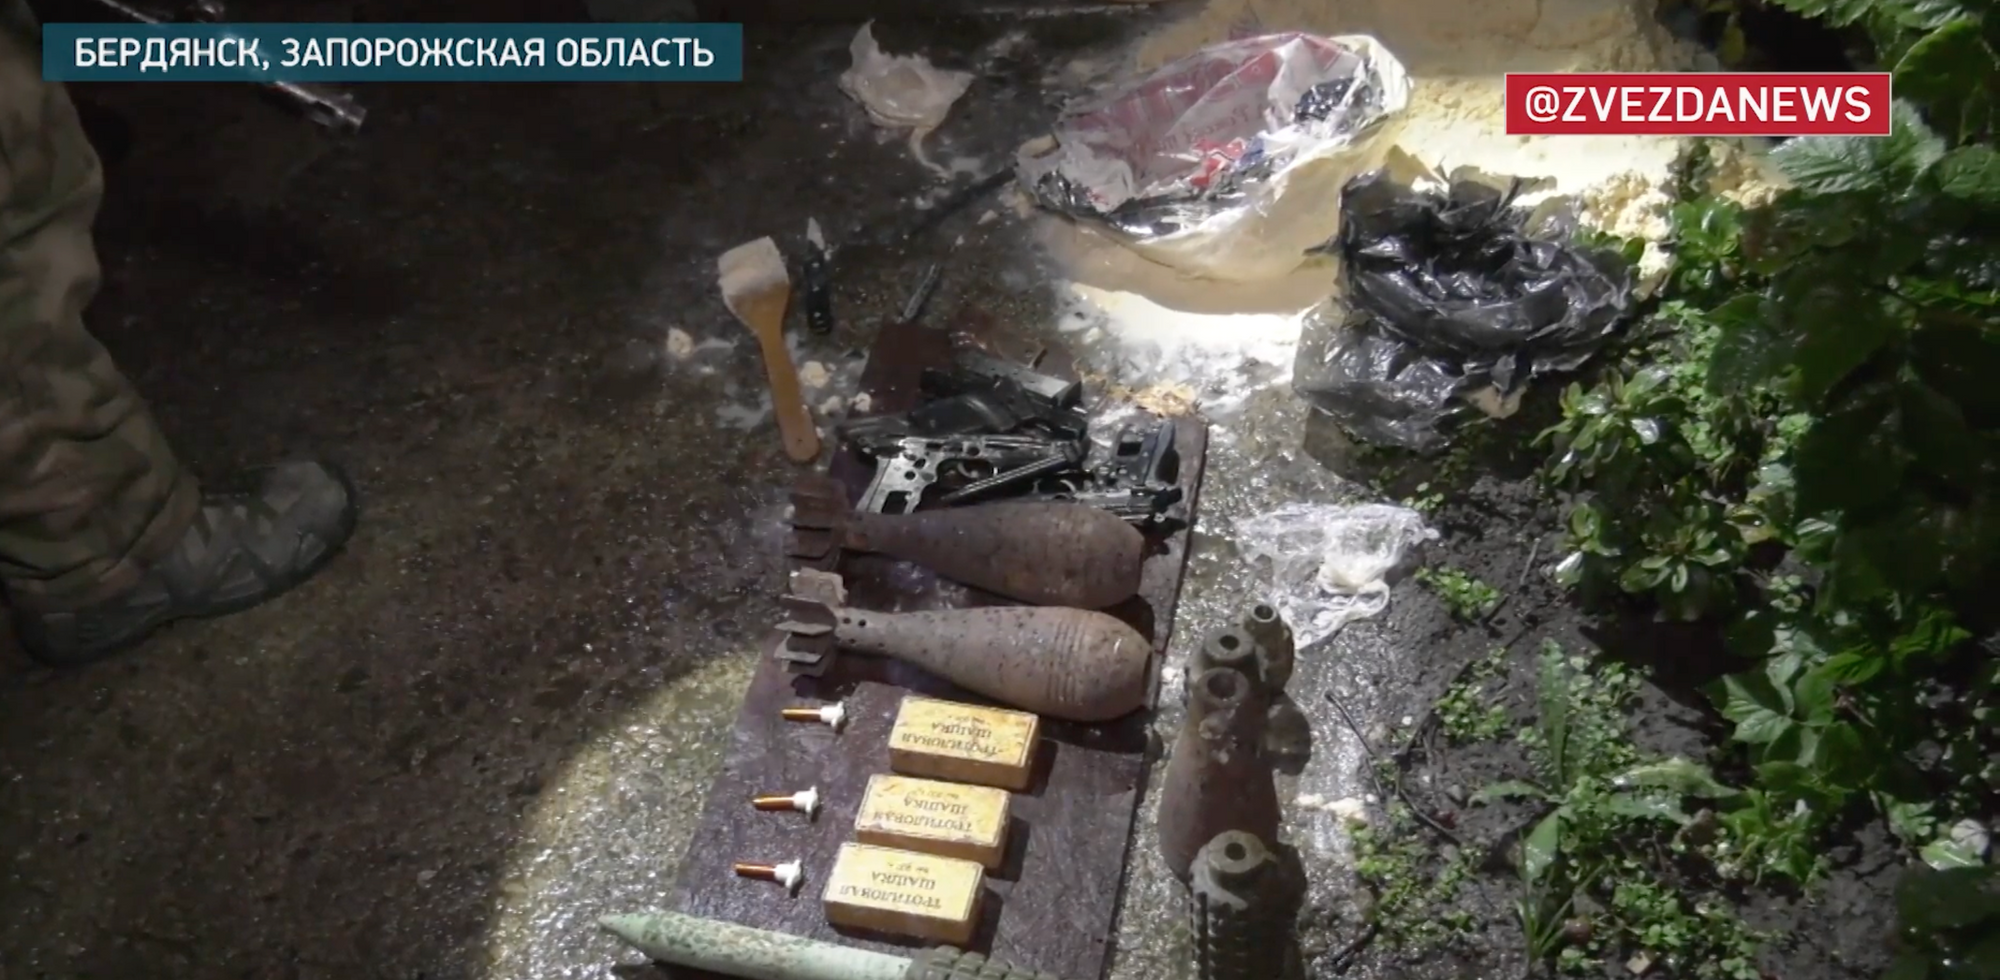 The weapons allegedly found in the Redemporist rectory in Berdiansk. - фото 103757